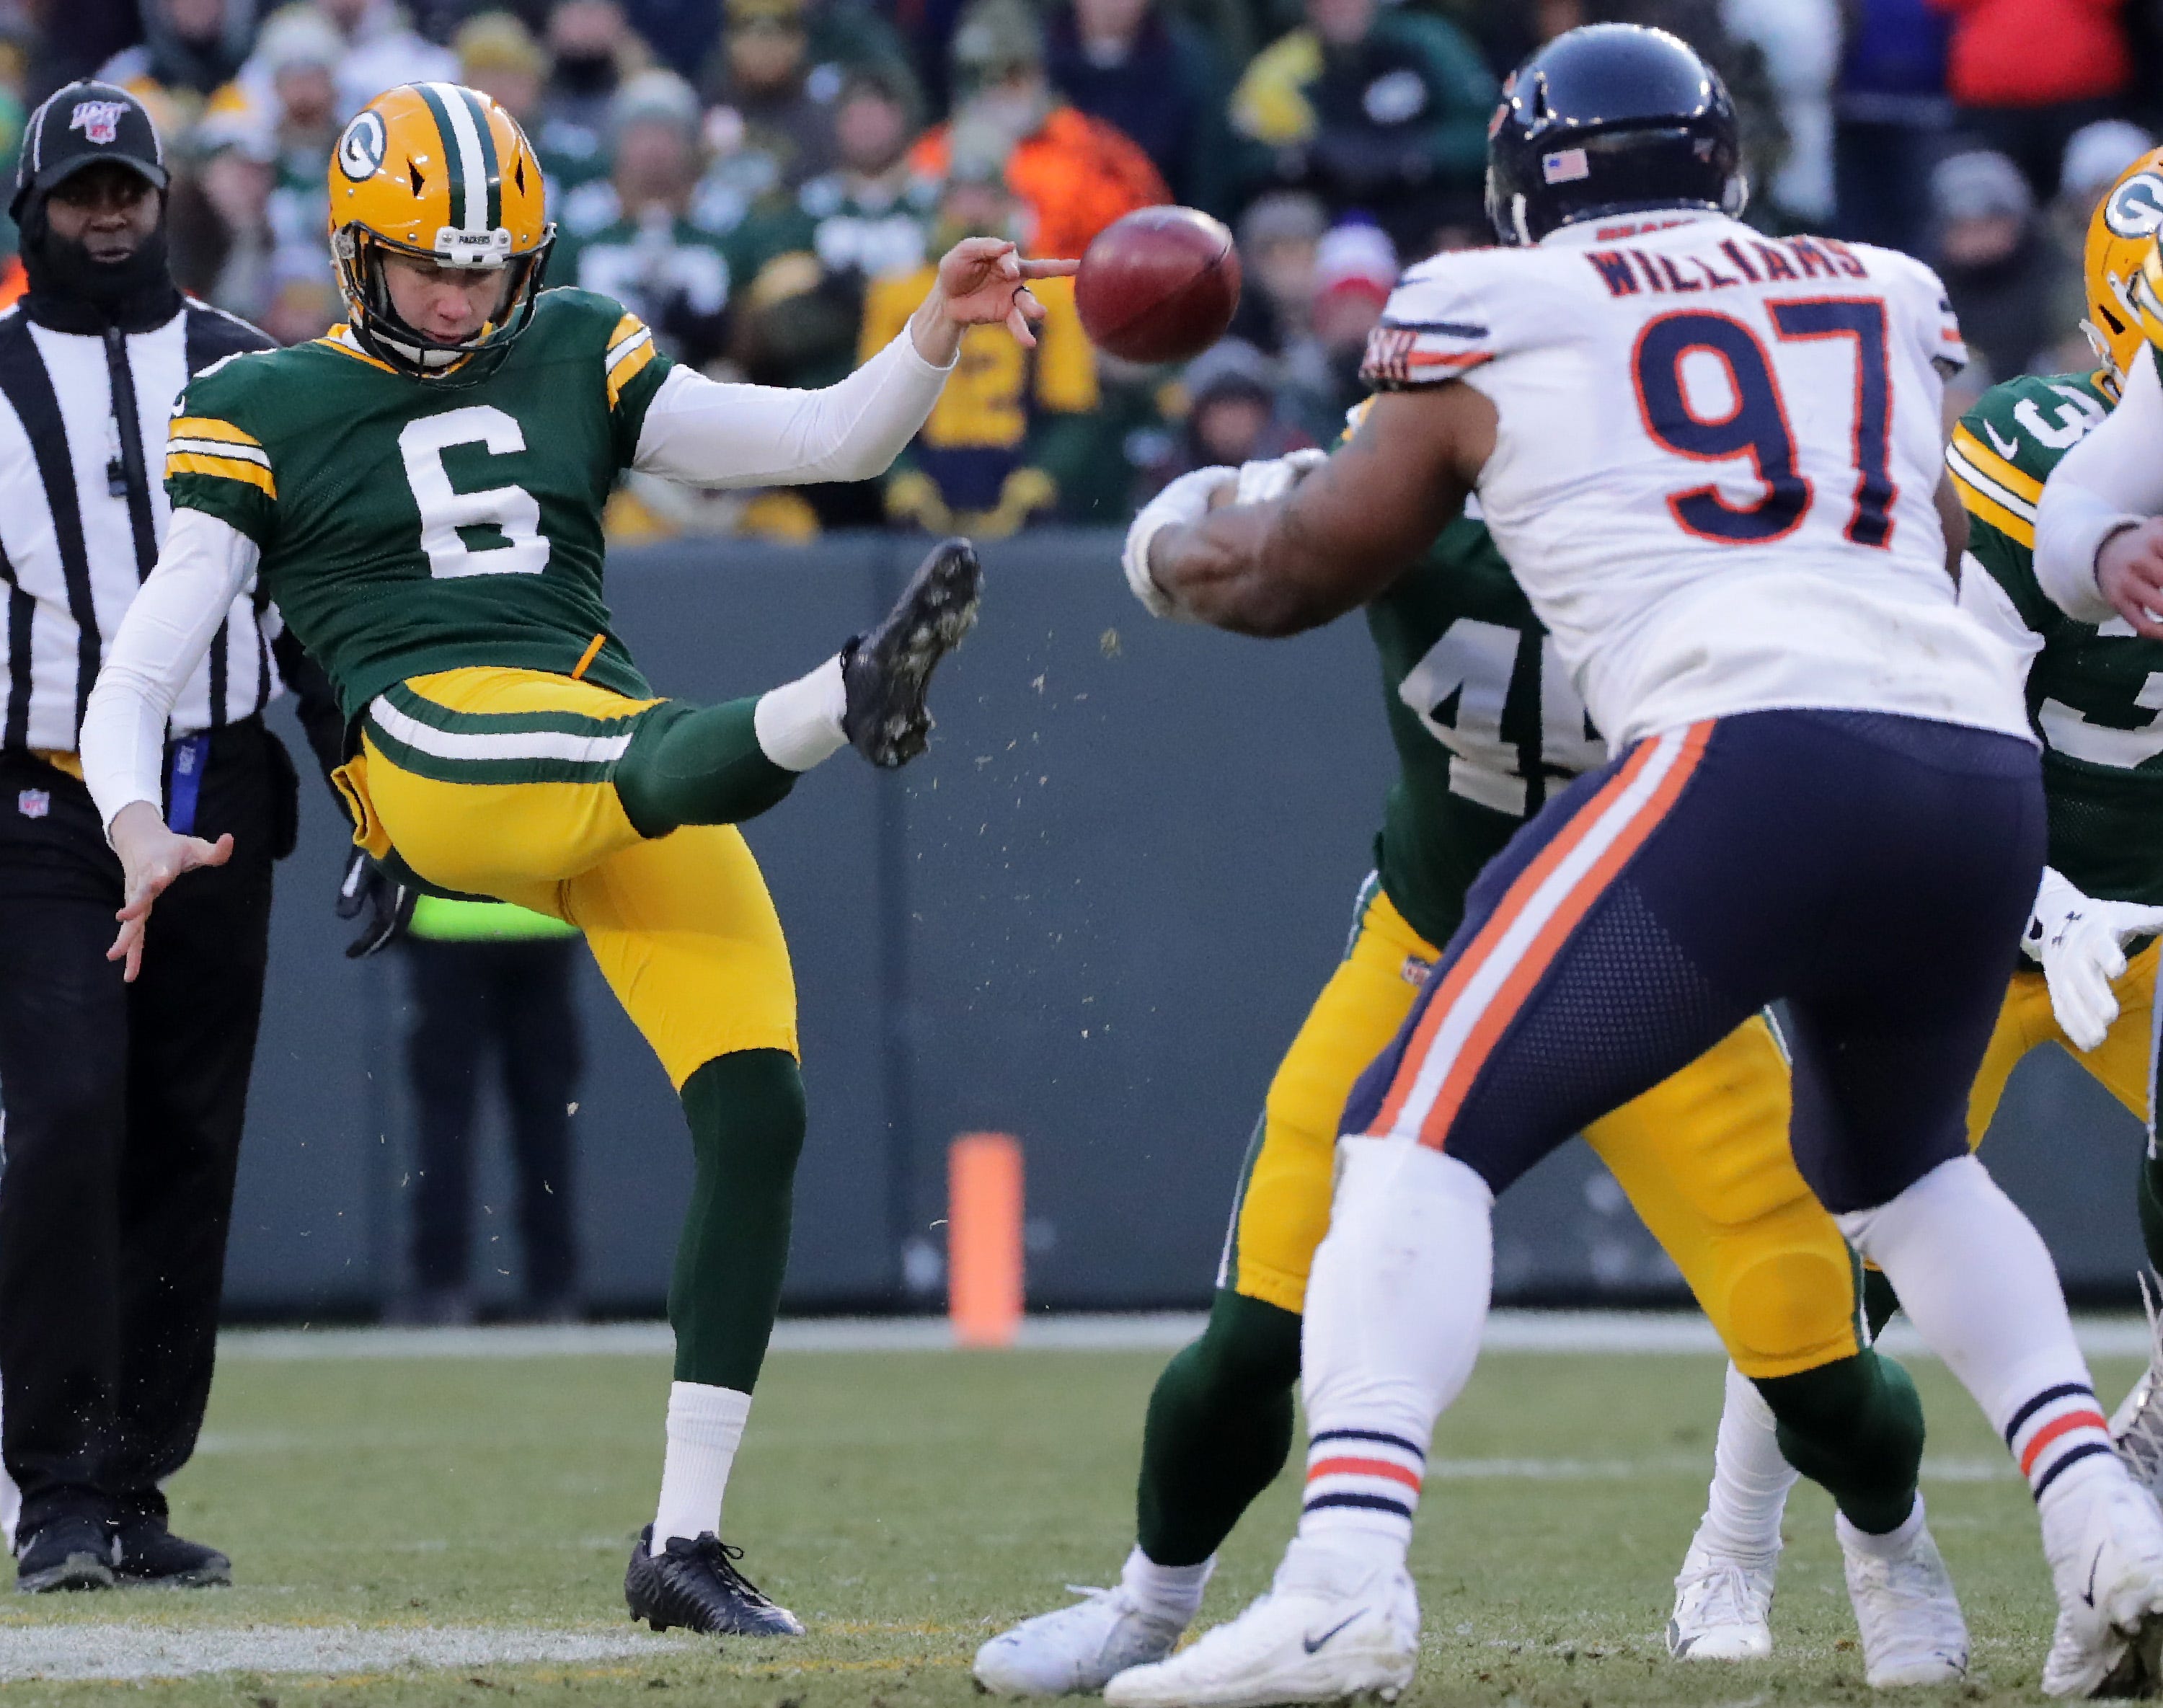 Green Bay Packers punter J.K. Scott (6) against the Chicago Bears during their football game on Sunday, December 15, 2019, at Lambeau Field in Green Bay, Wis.